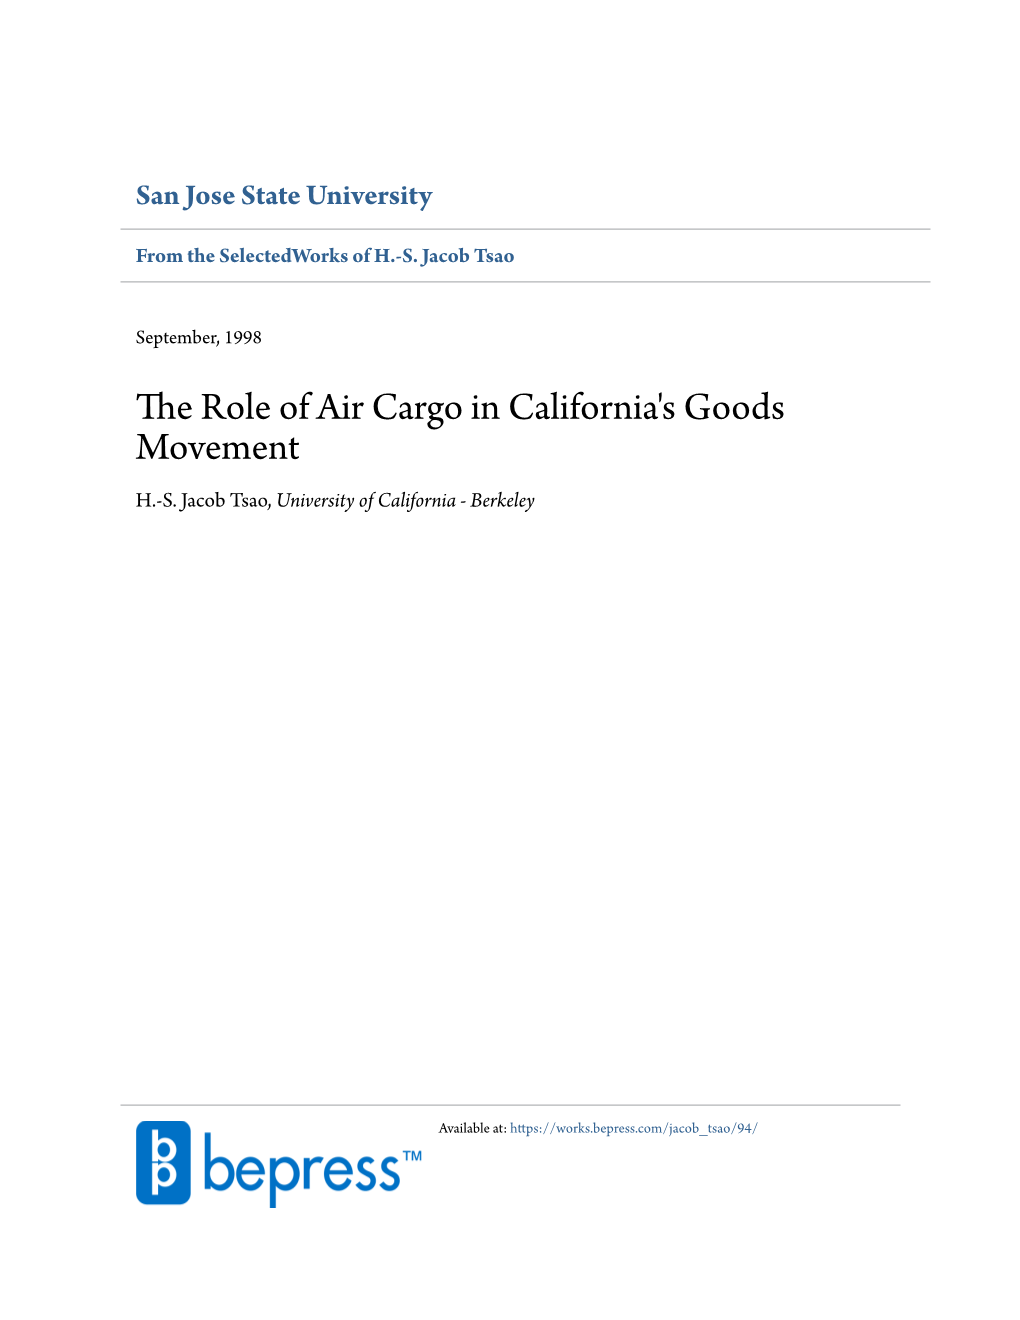 The Role of Air Cargo in California's Goods Movement H.-S